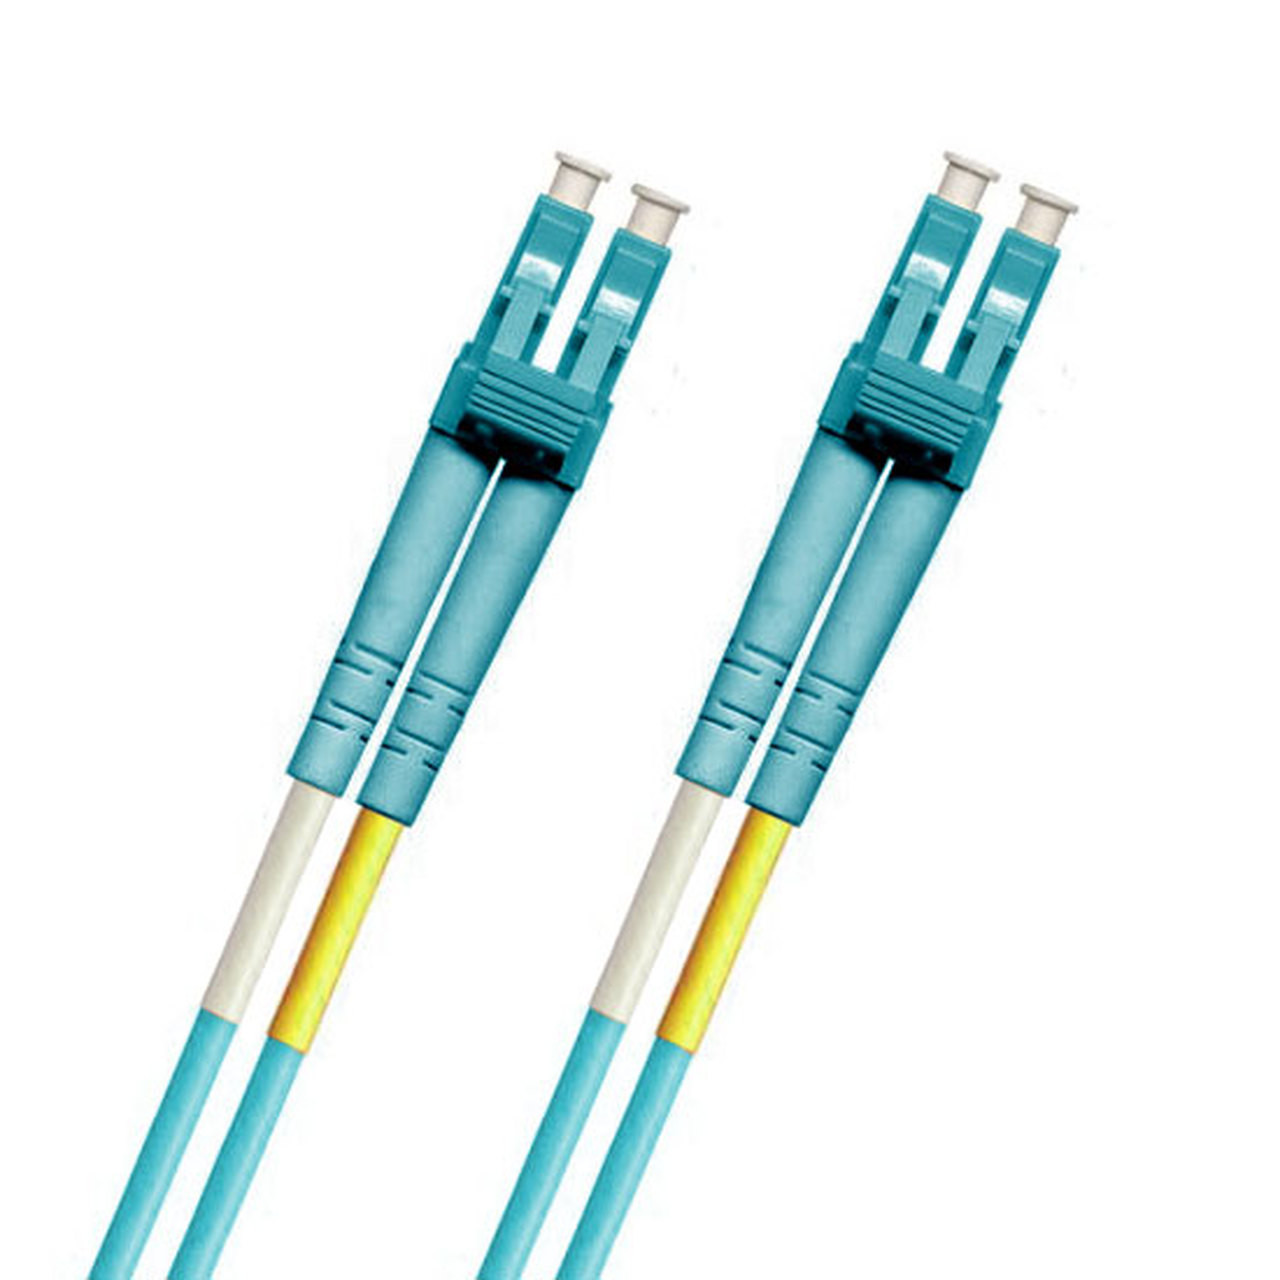 791818OM3S030FR1 - LC-LC Fiber Patch Cable, Multimode 50/125 10 Gig OM3, Duplex - 30 Foot